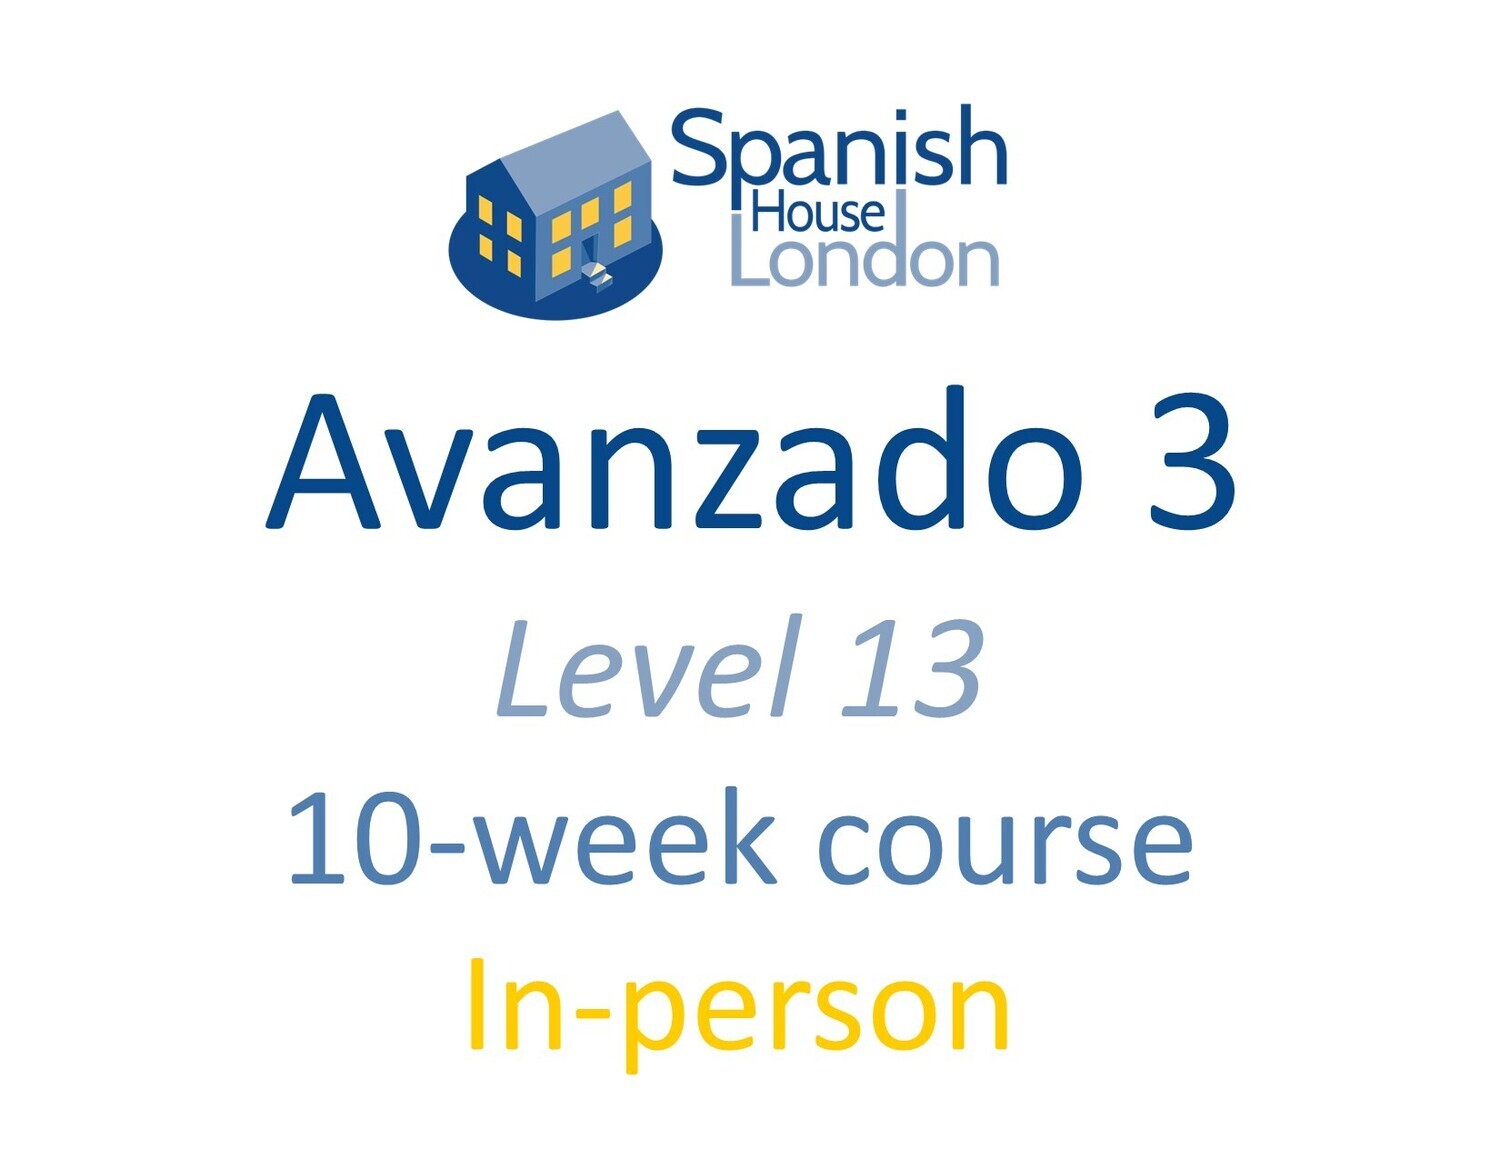 Avanzado 3 Course starting on 6th July at 7.30pm in Clapham North